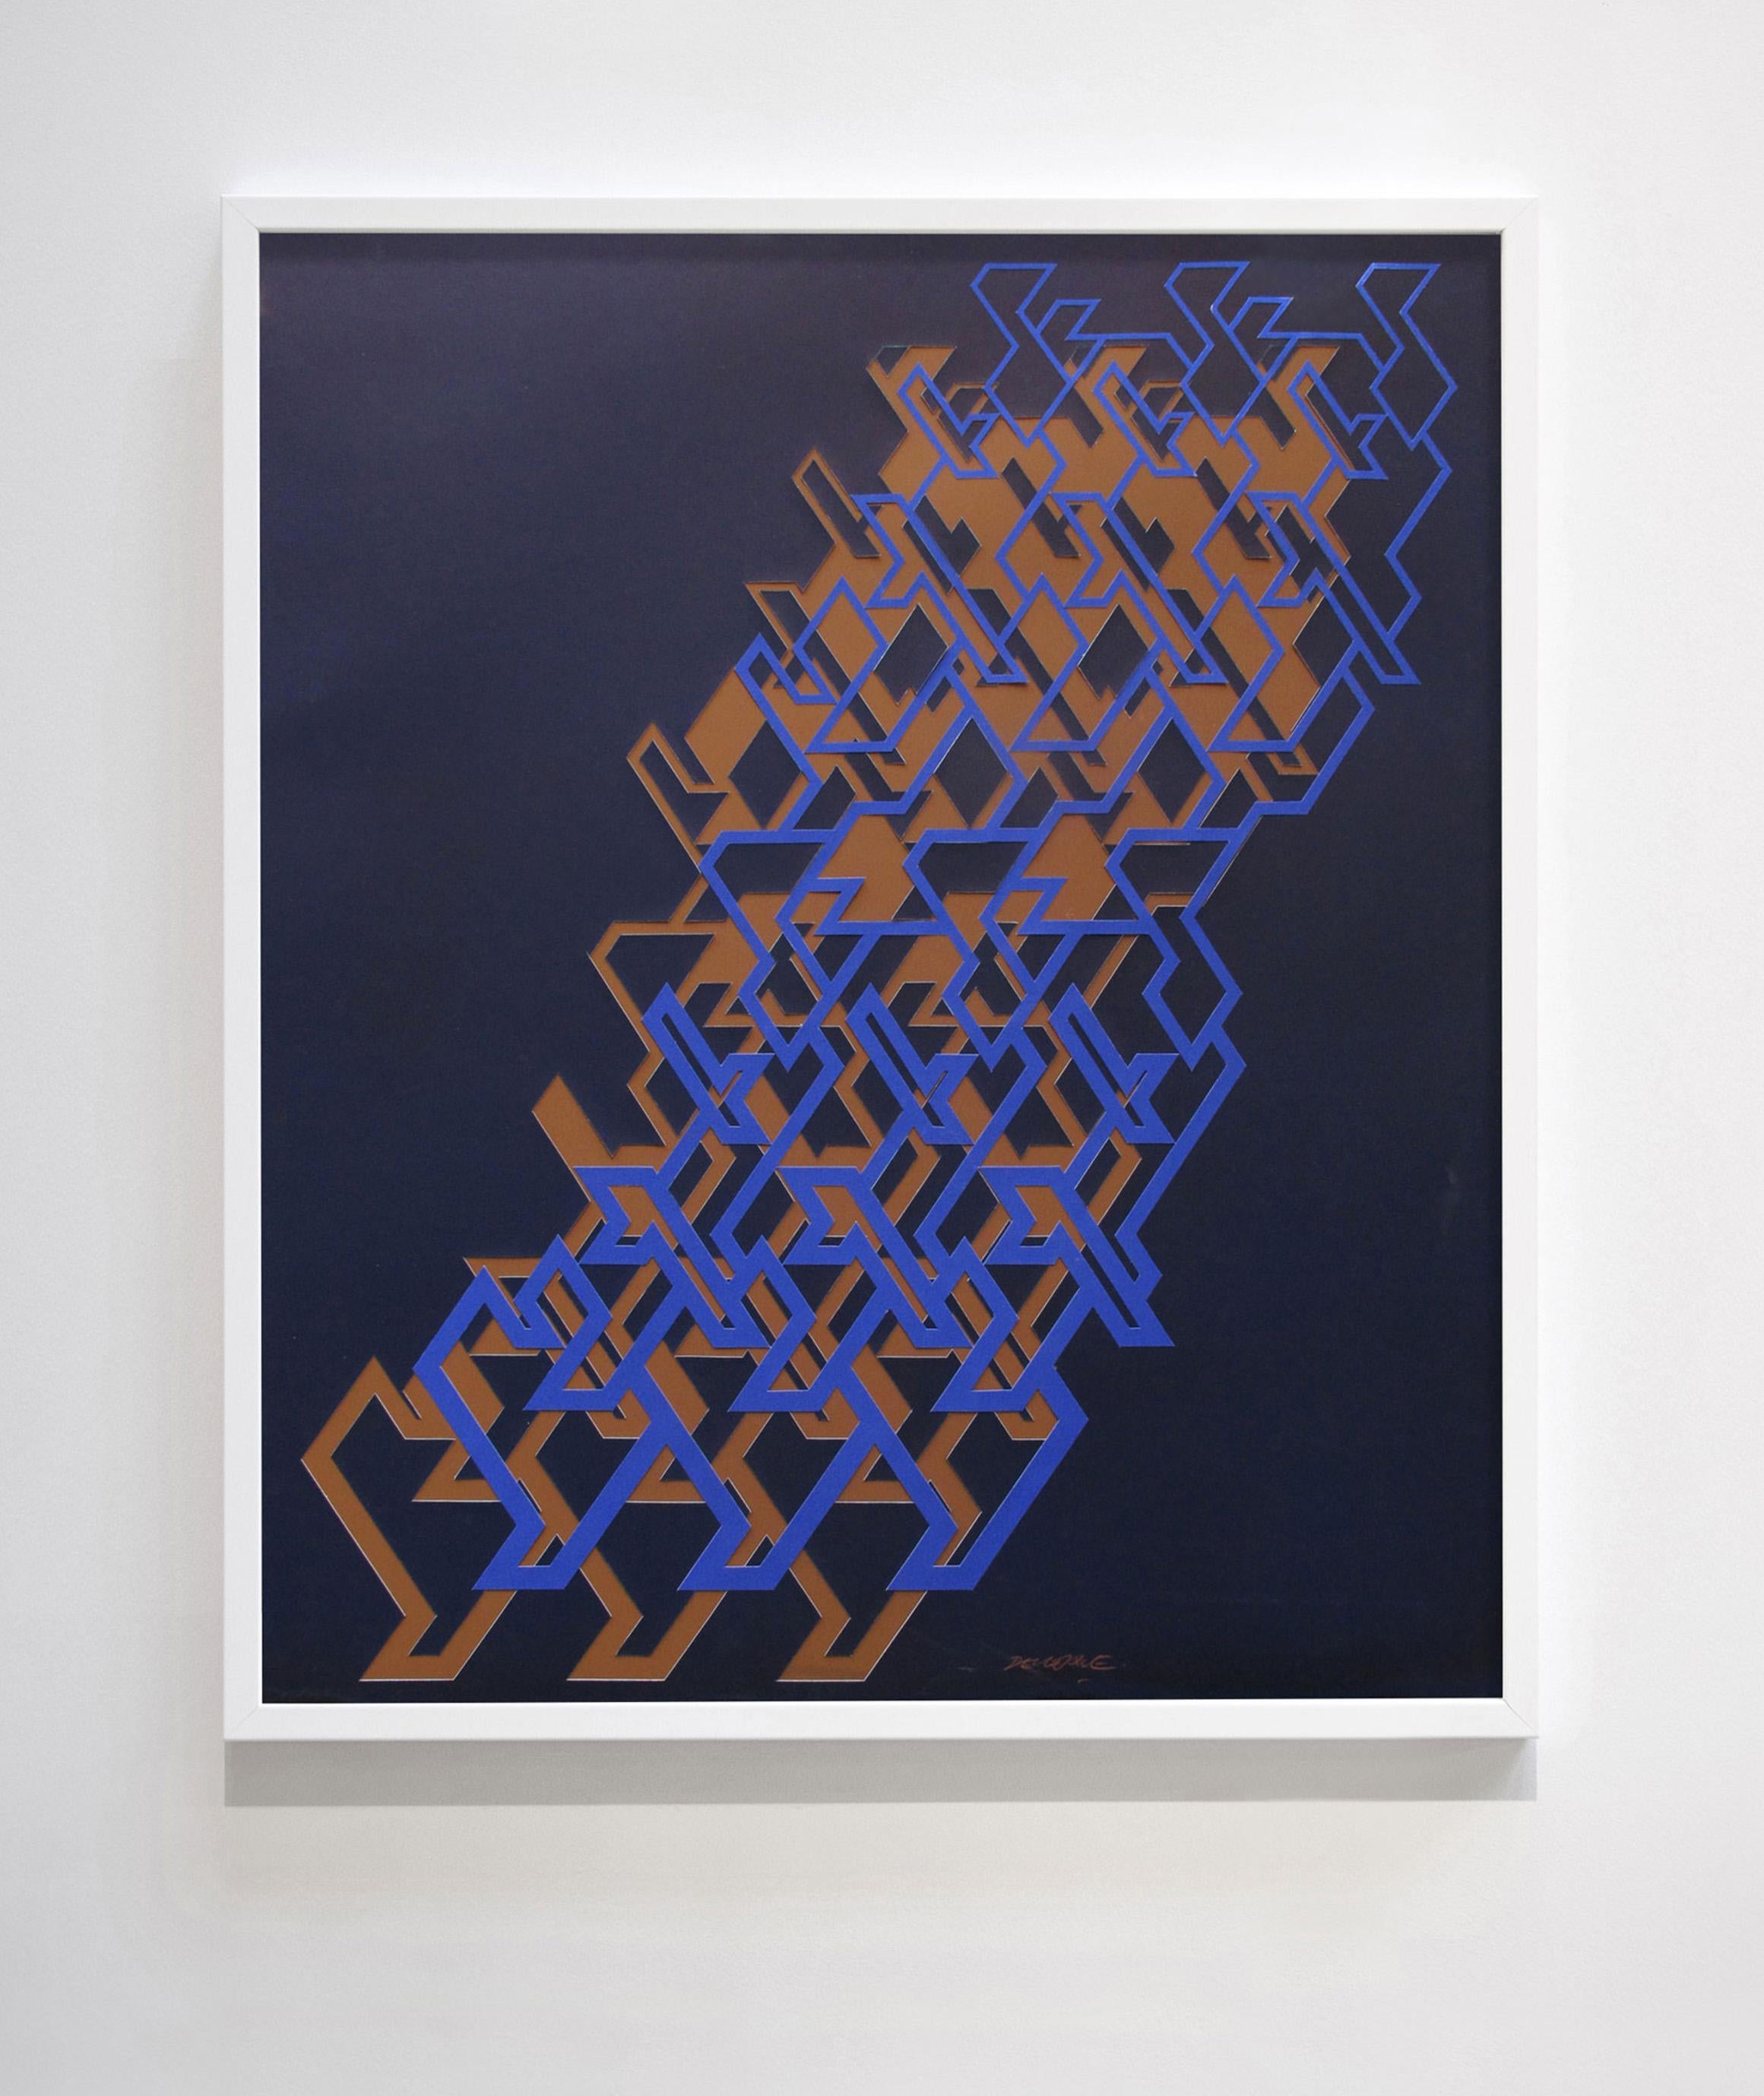 Michel Deverne Landscape Painting - Kinetic Modern Abstract Painting - Blue Geometric Paper Collage - "Graphisme"